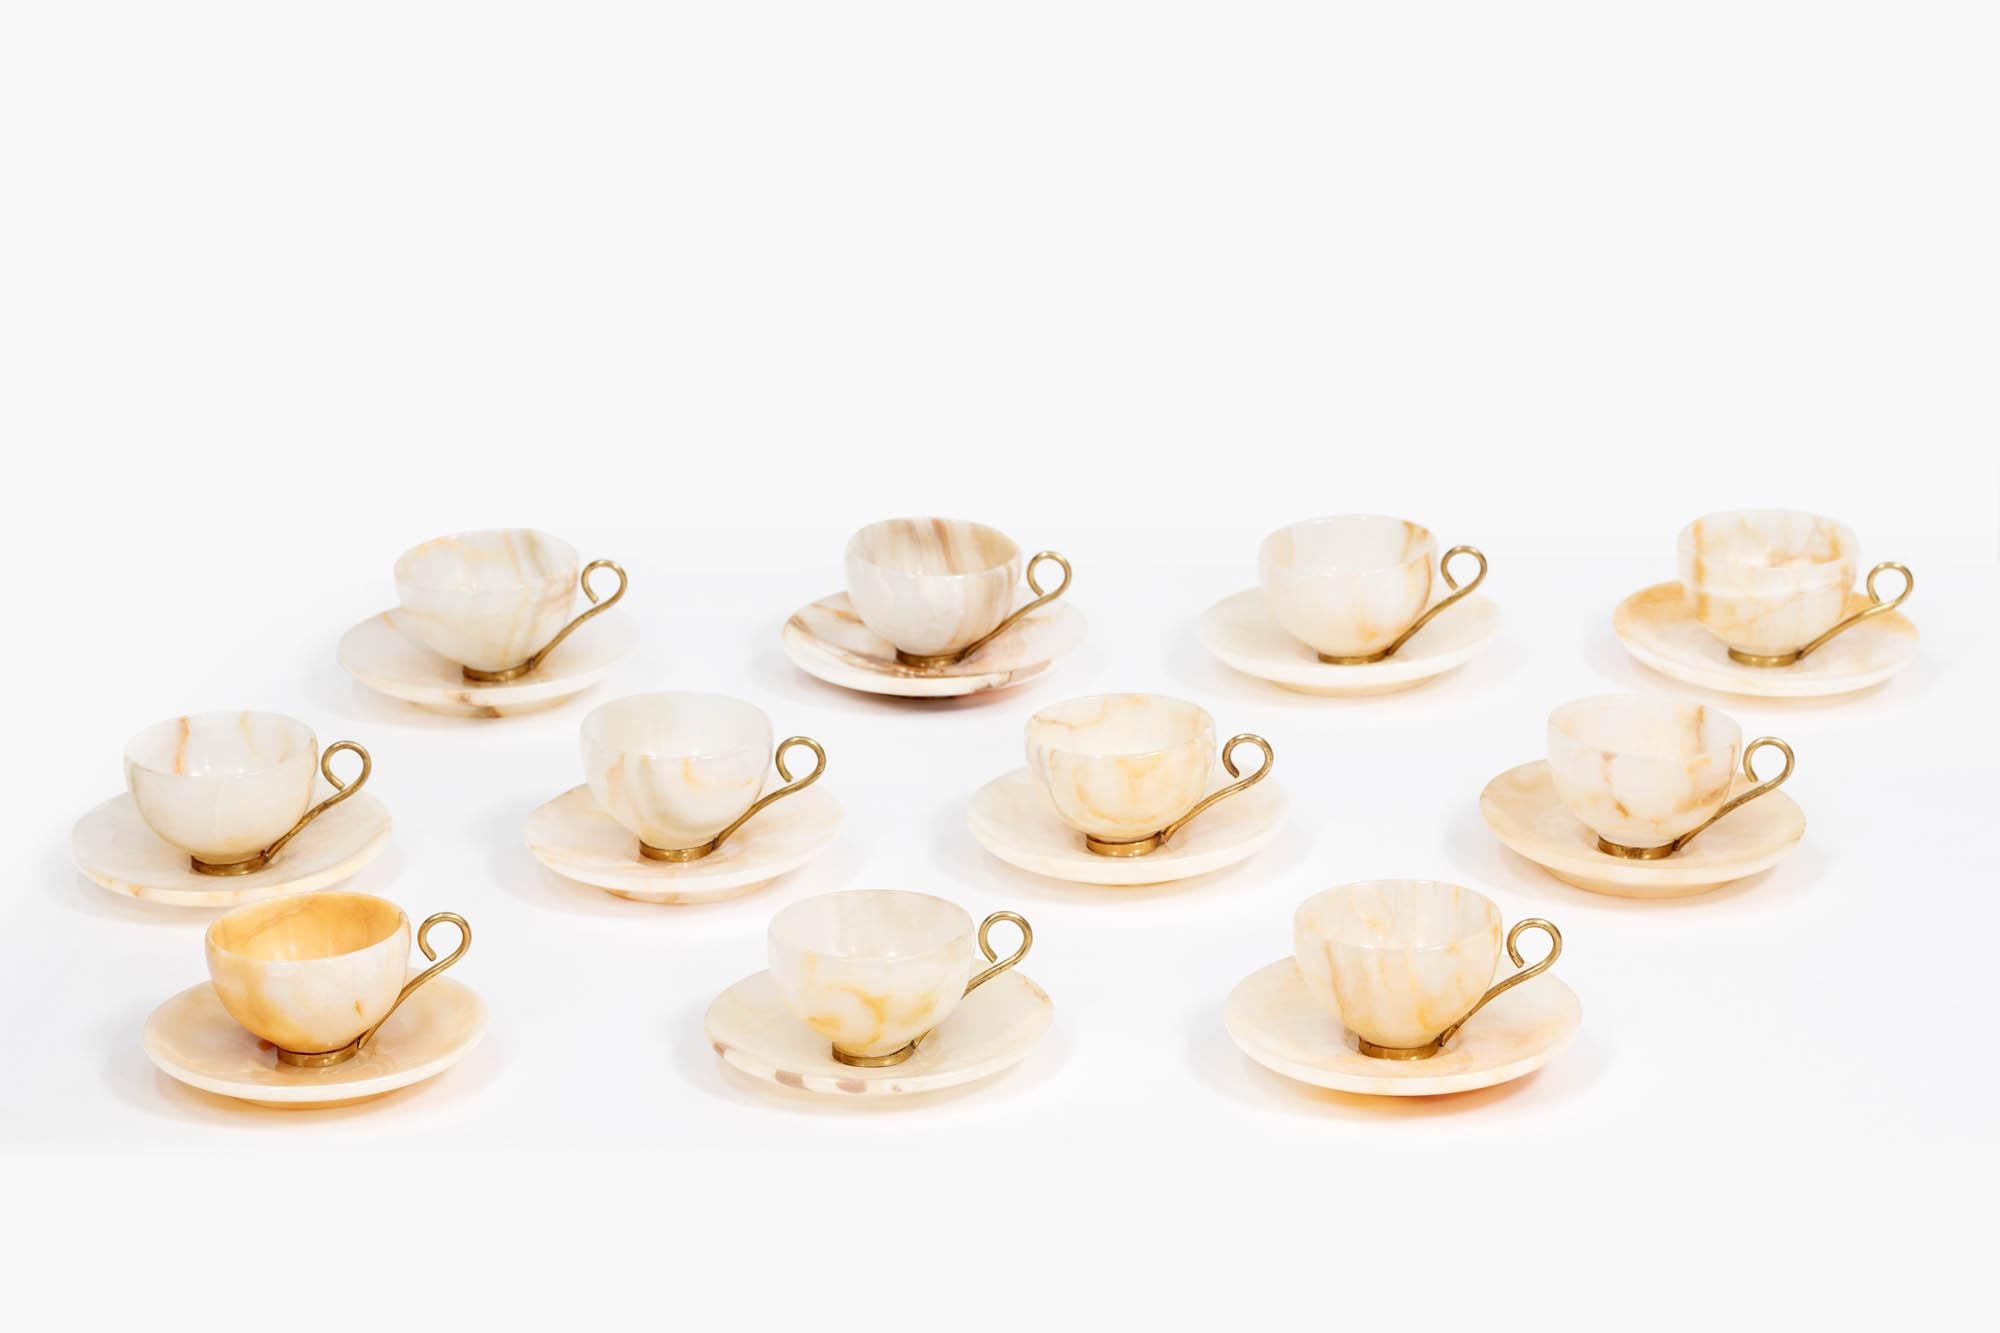 Italian Early 20th Century Set of Agate Espresso Cups & Saucers